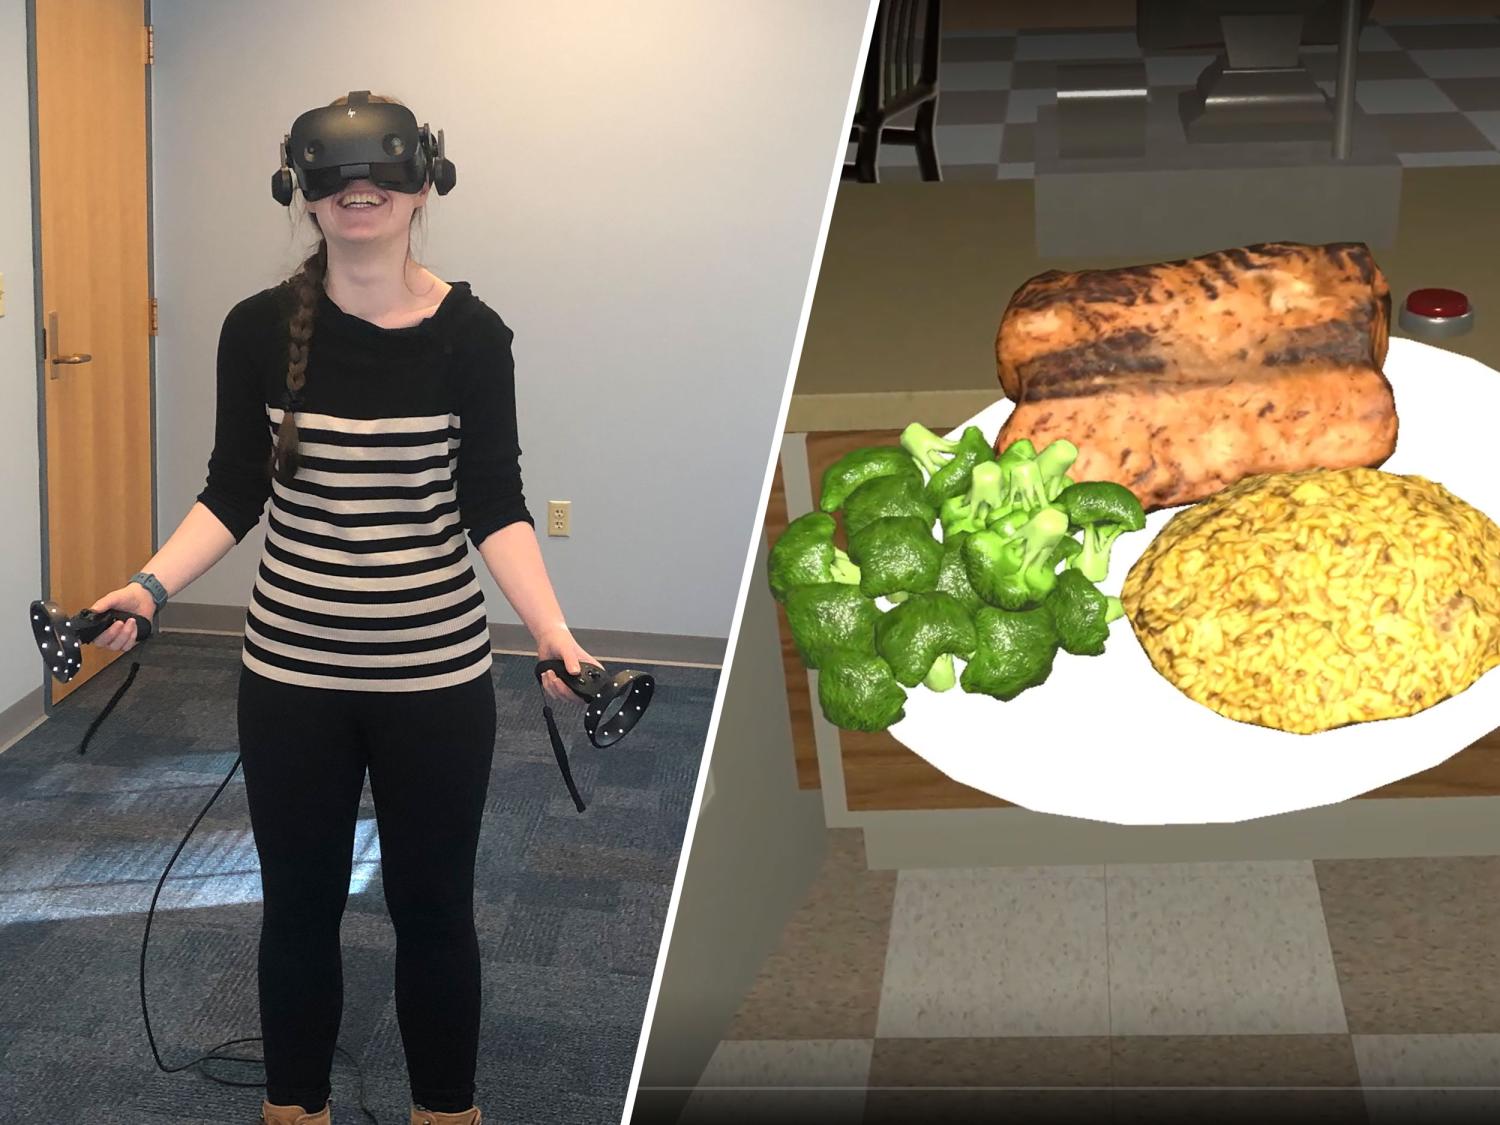 Virtual reality user and food portion sizes